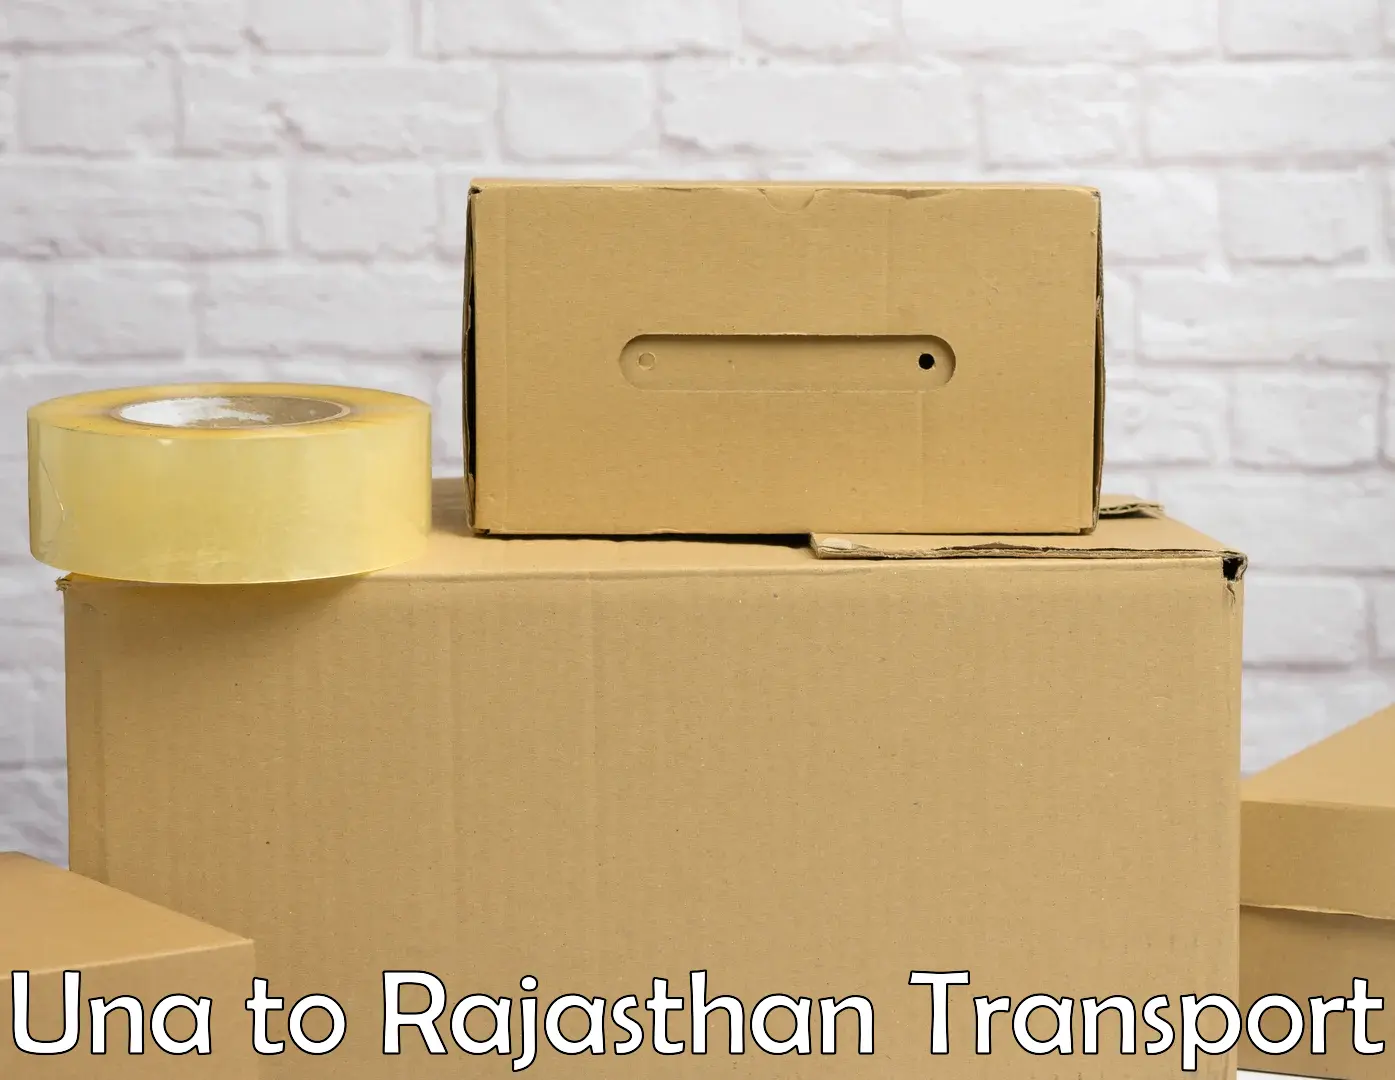 Container transportation services in Una to Udaipur